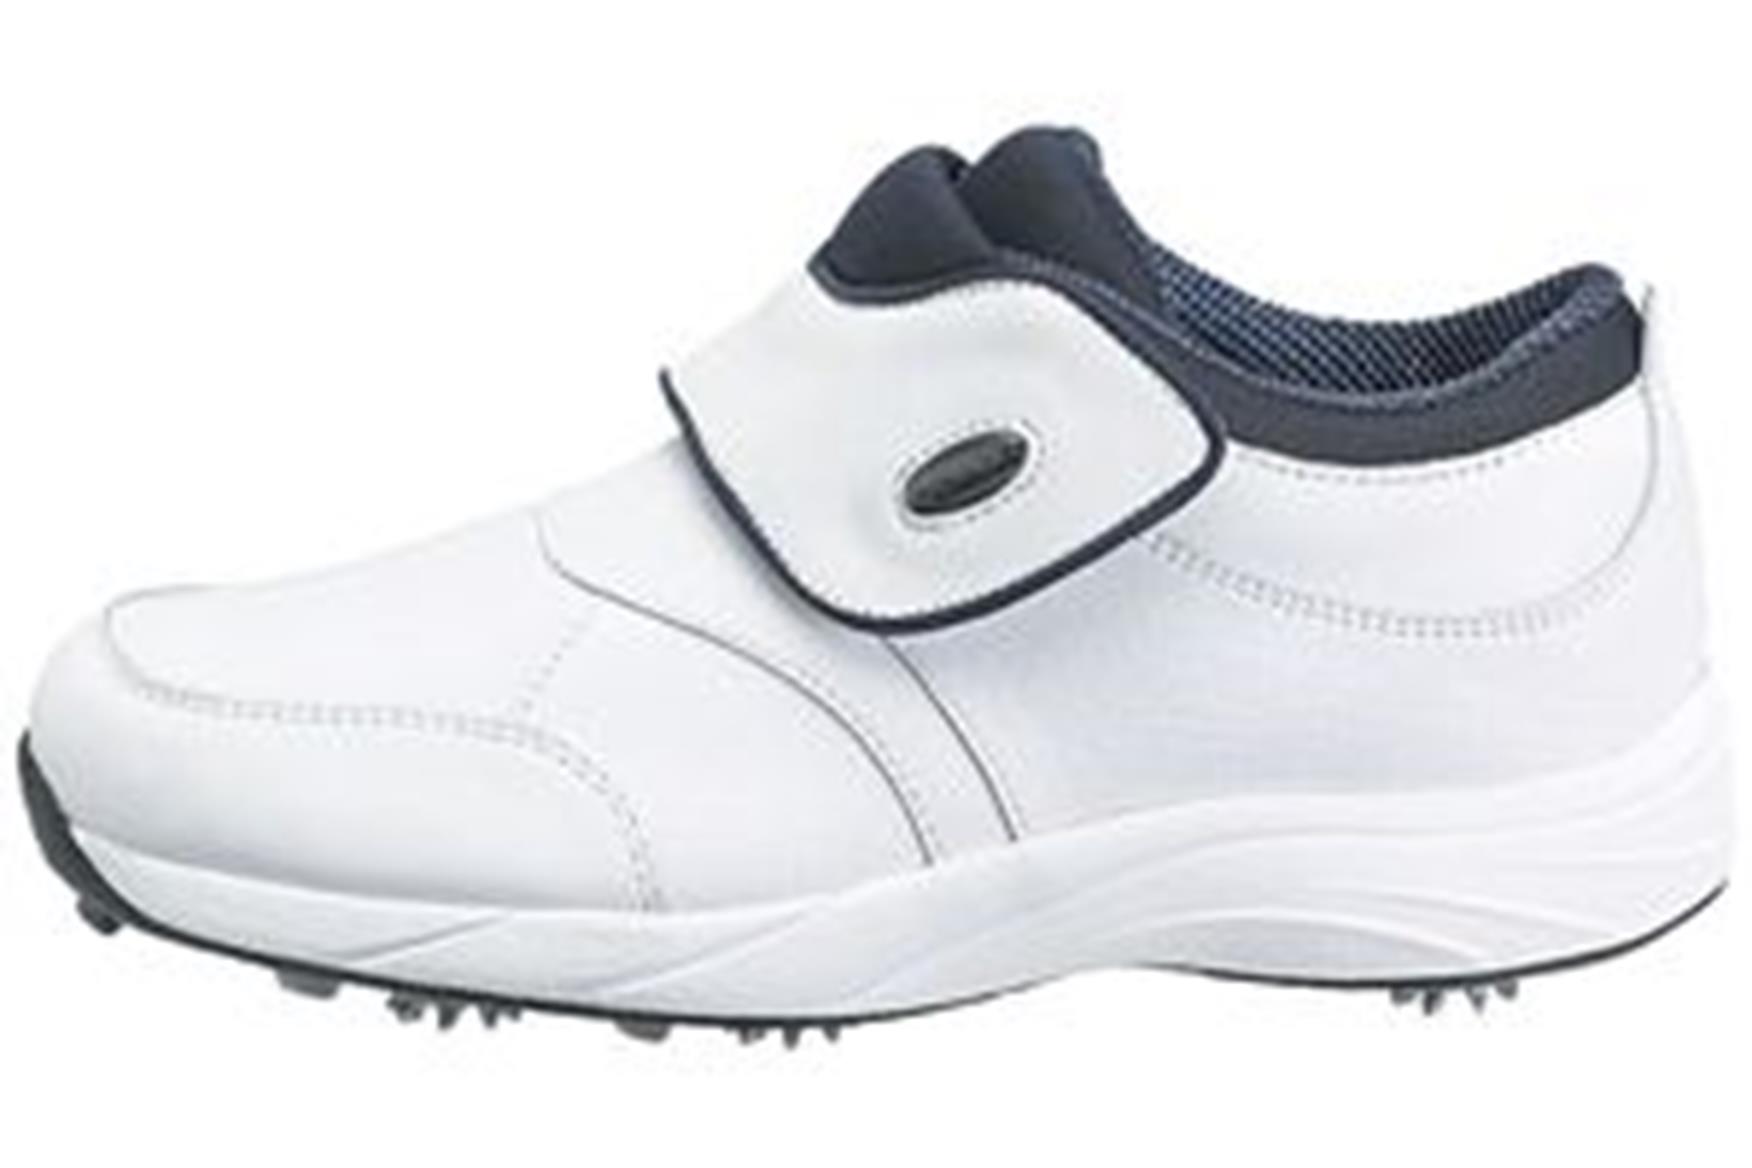 mens golf shoes with velcro straps